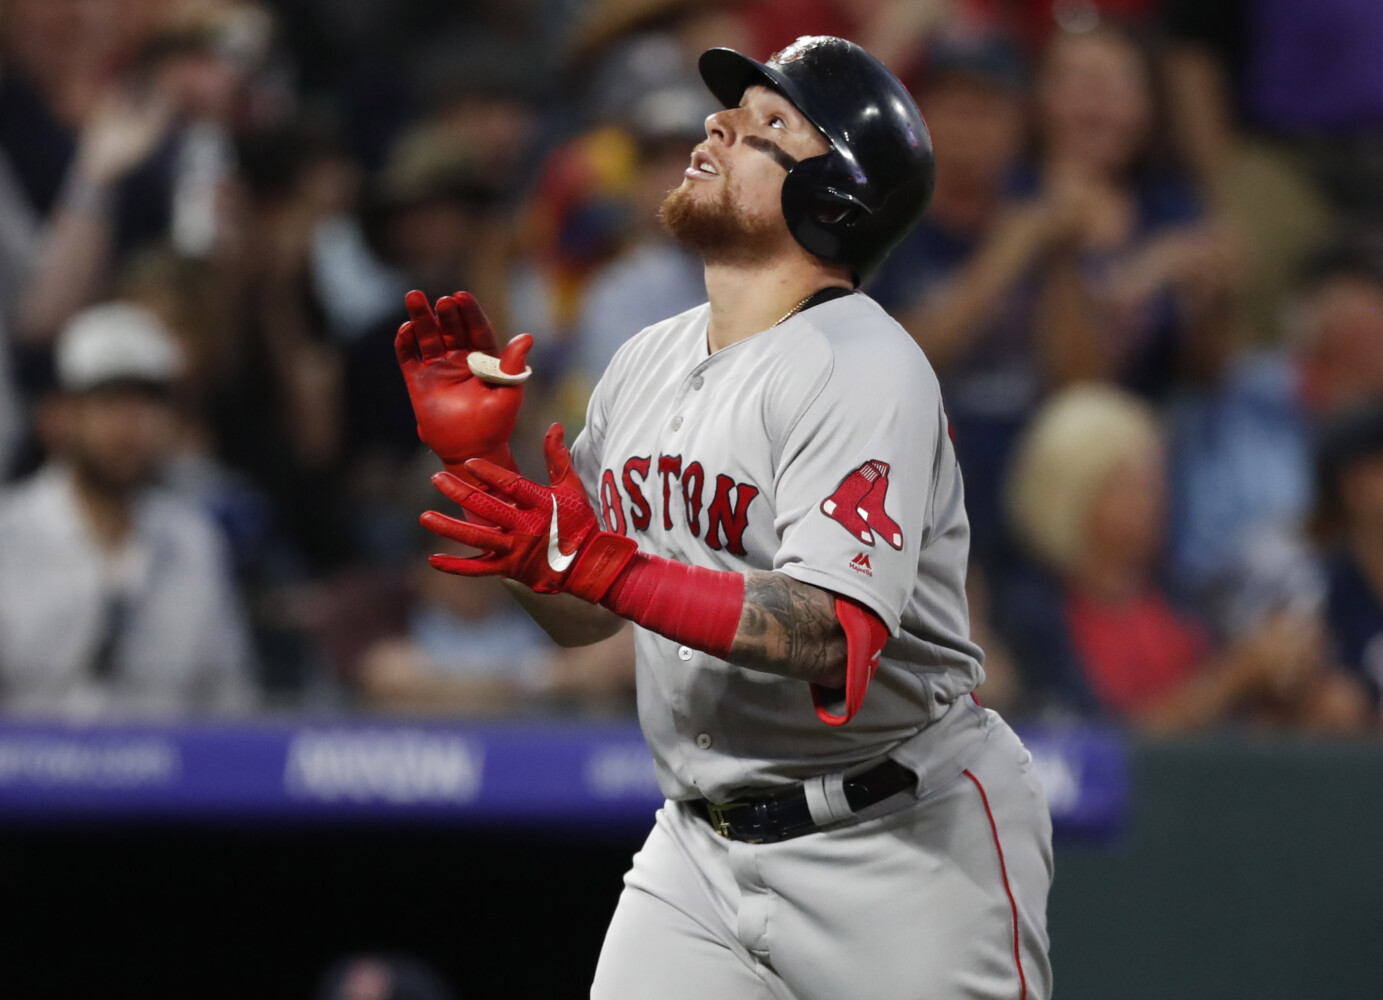 World Series: Christian Vazquez praised by Phillies, Astros after